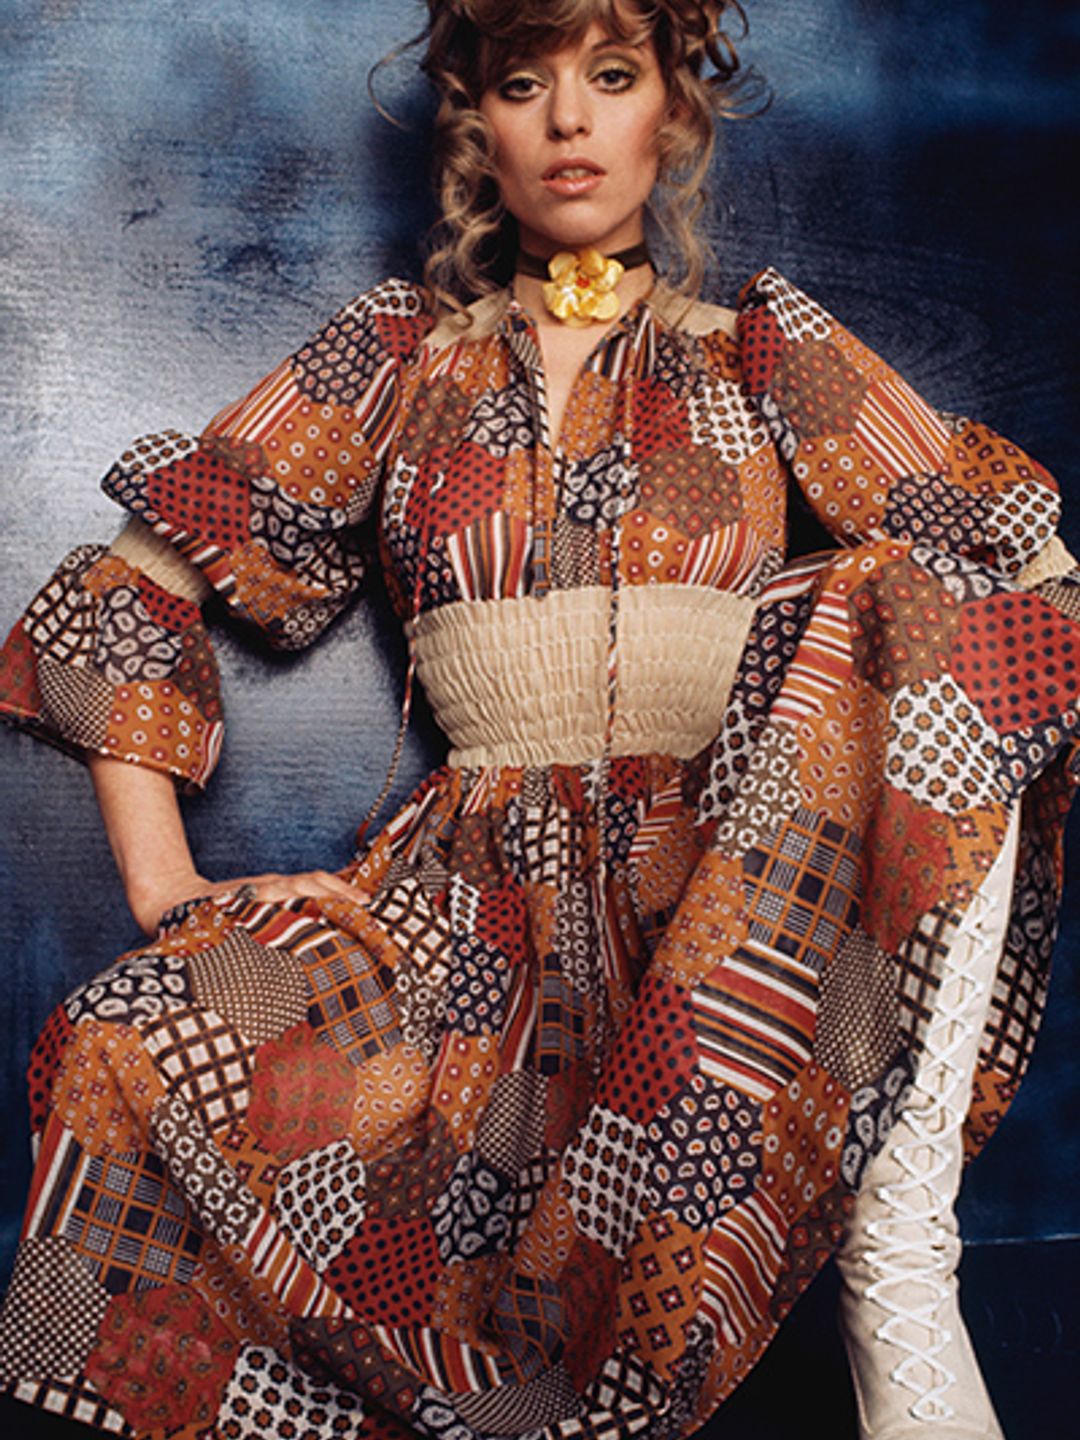 The Best of 70s Fashion: 1970s Trend Outfit Inspiration